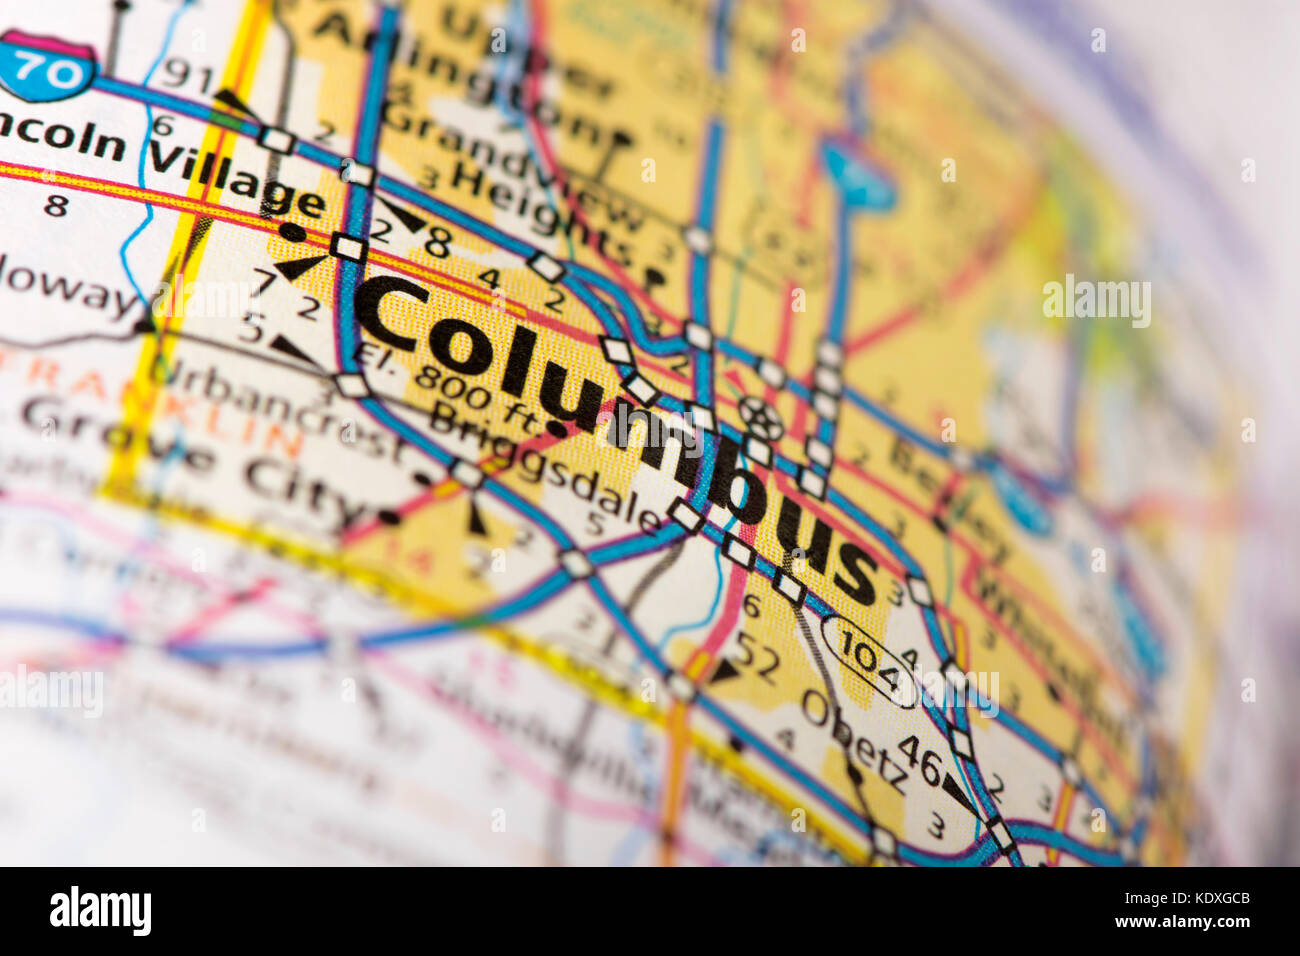 Closeup Of Columbus Ohio On A Road Map Of The United States KDXGCB 